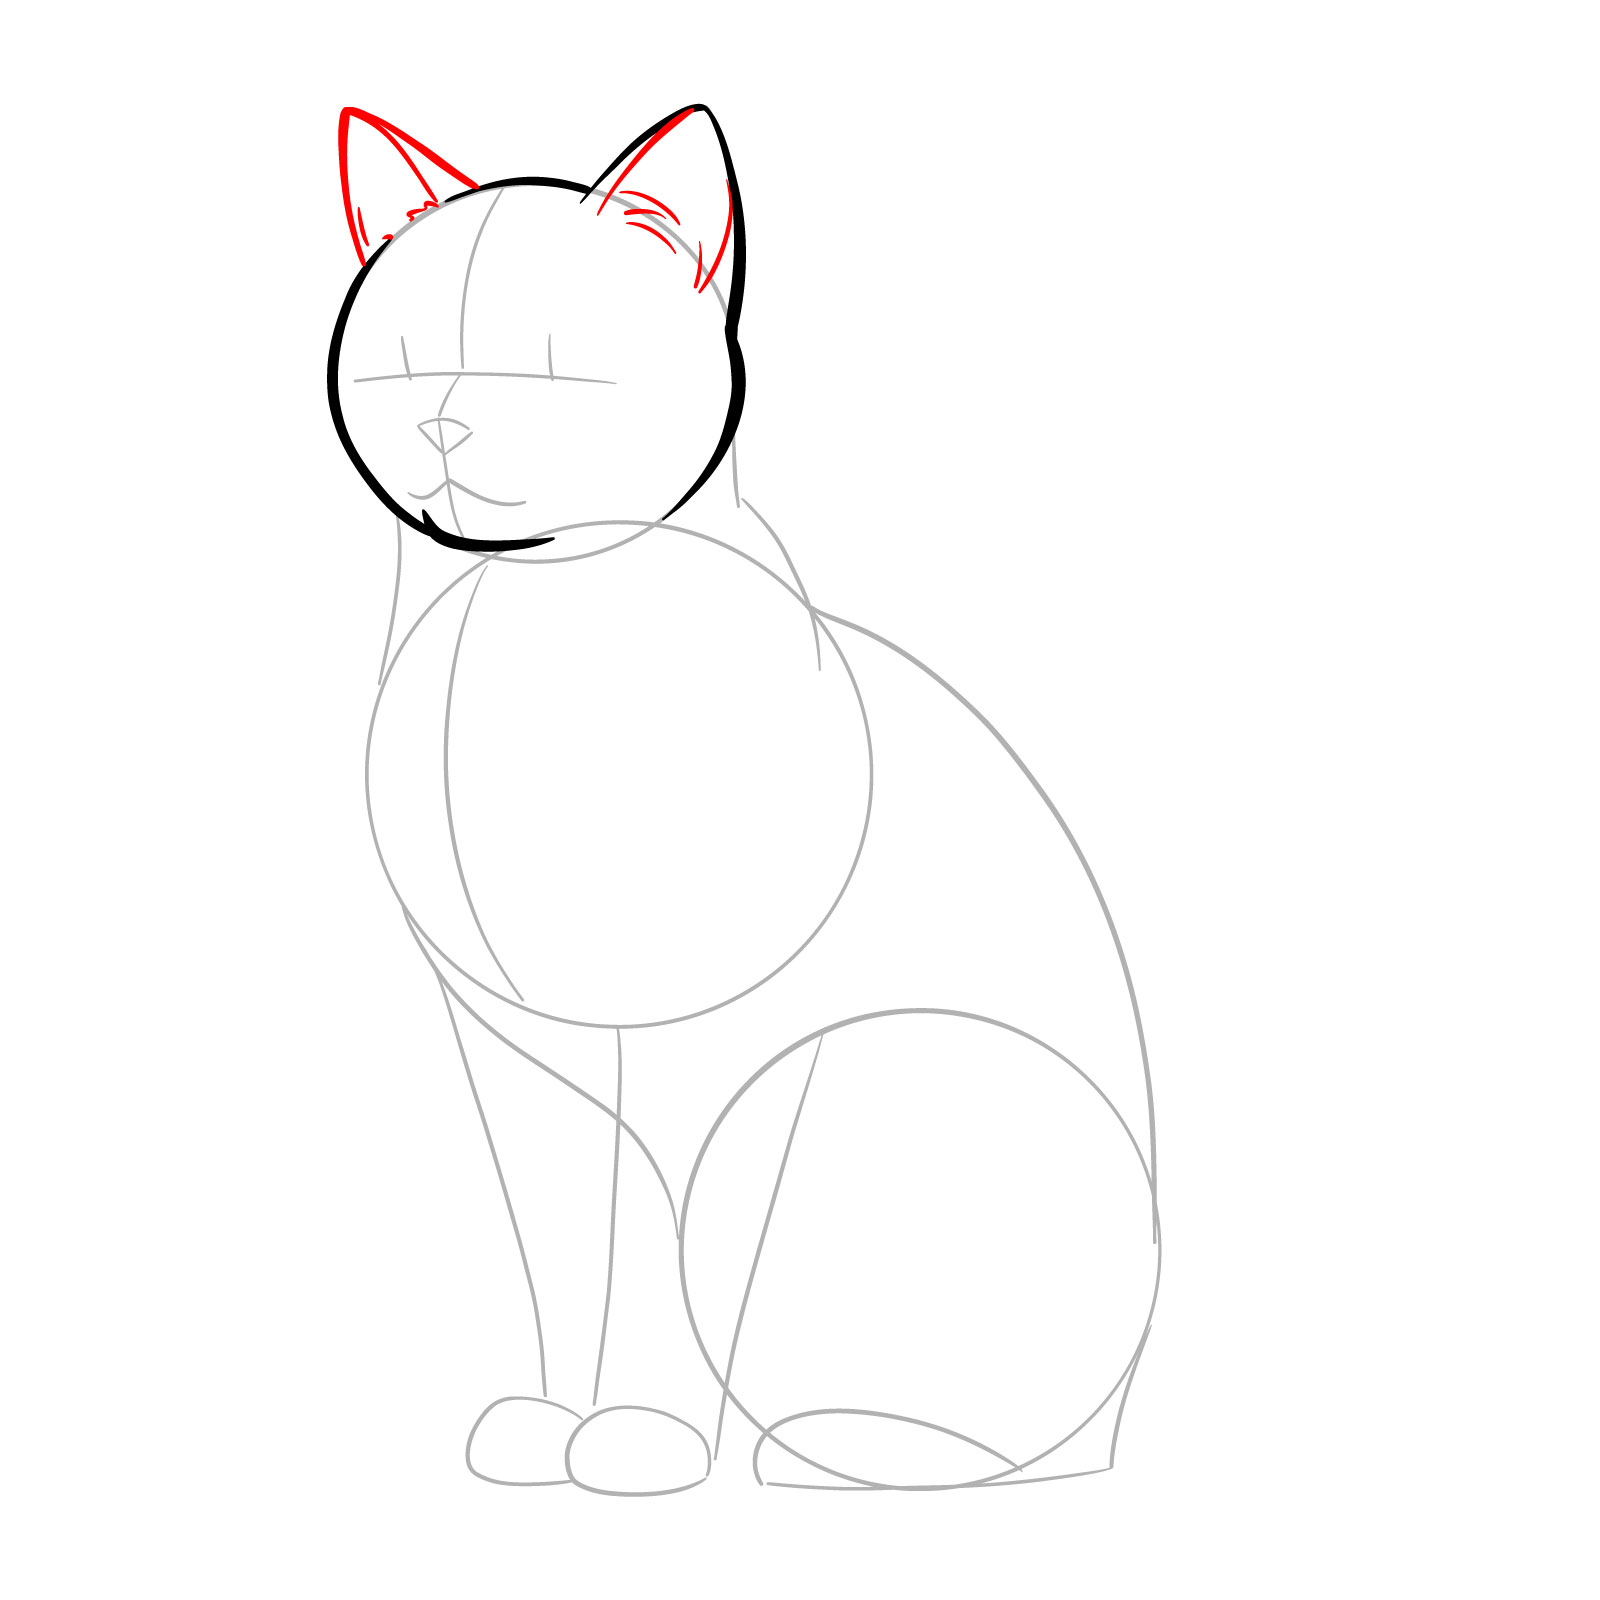 Sketching the second ear and detailing both ears of a cat - step 04